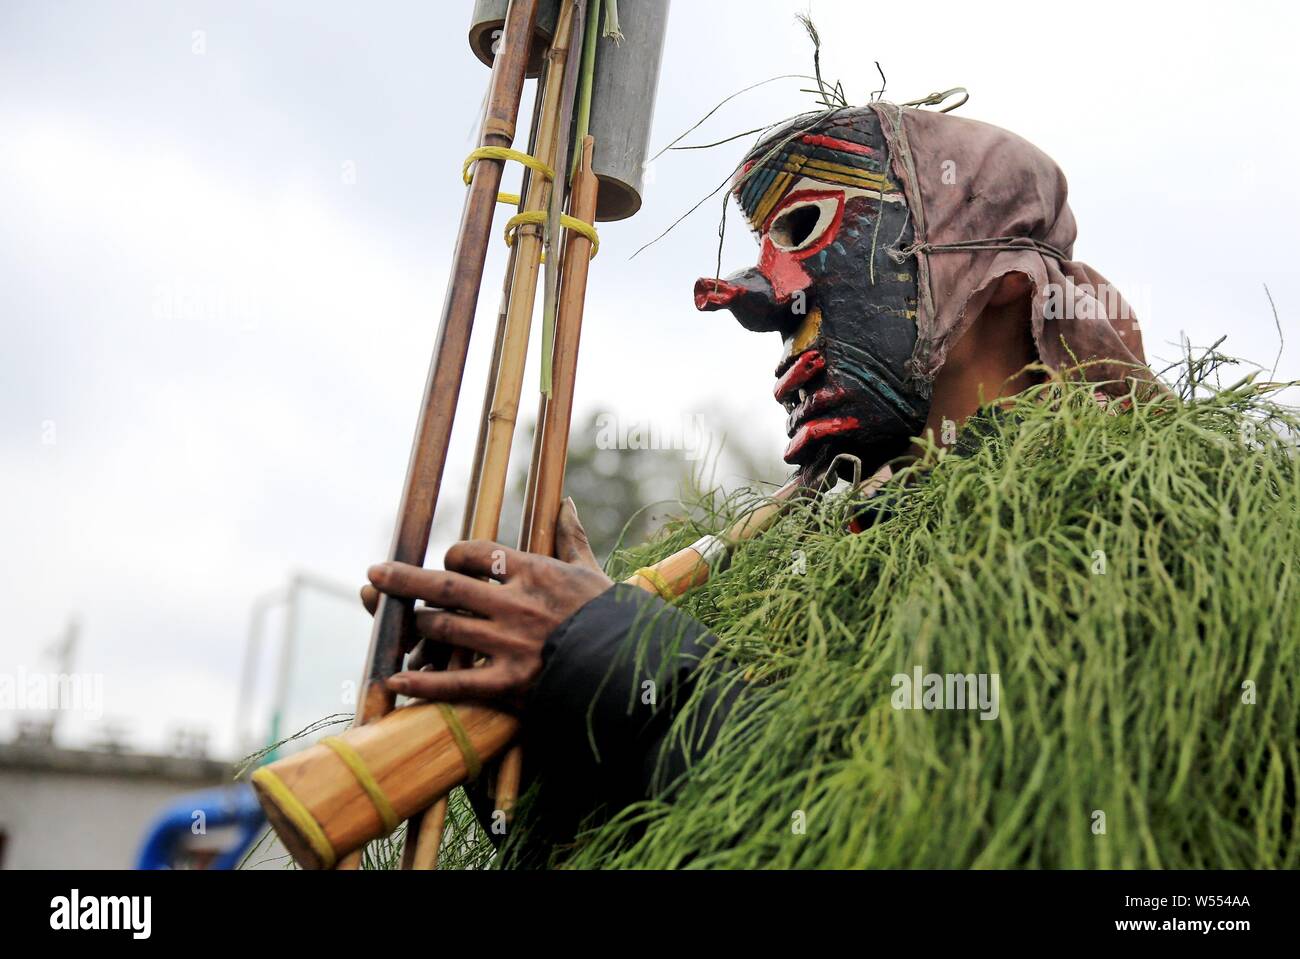 Chinese people of Miao ethnic group wearing masks and grassy cloaks dress up as the god to bring good luck to villagers during the Manggao Festival in Stock Photo